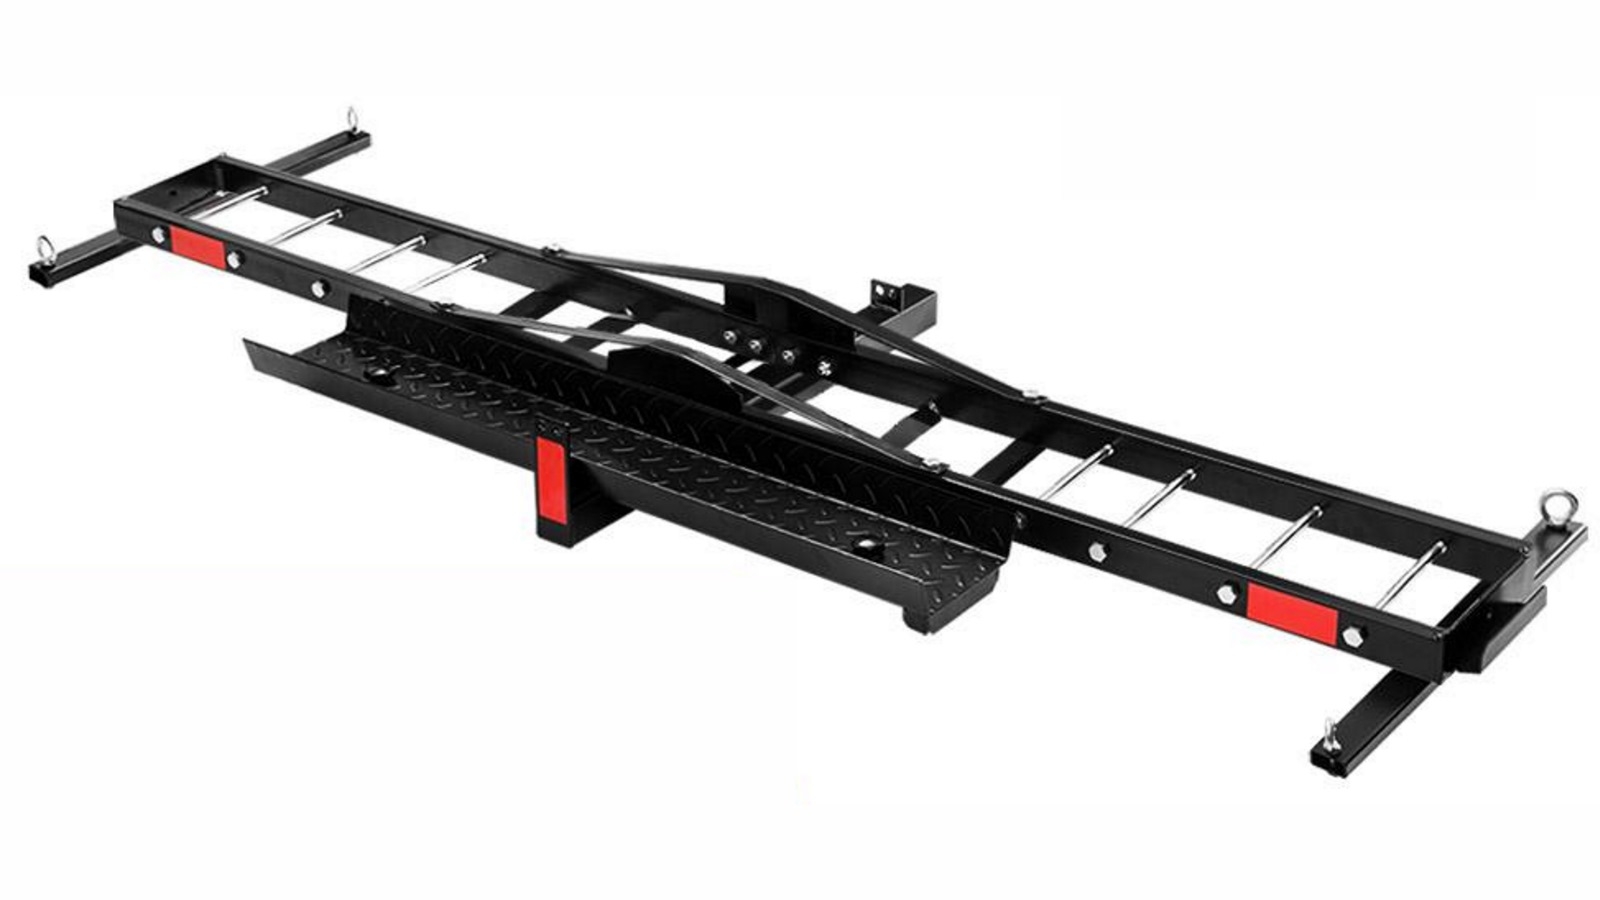 towbar motorcycle carrier